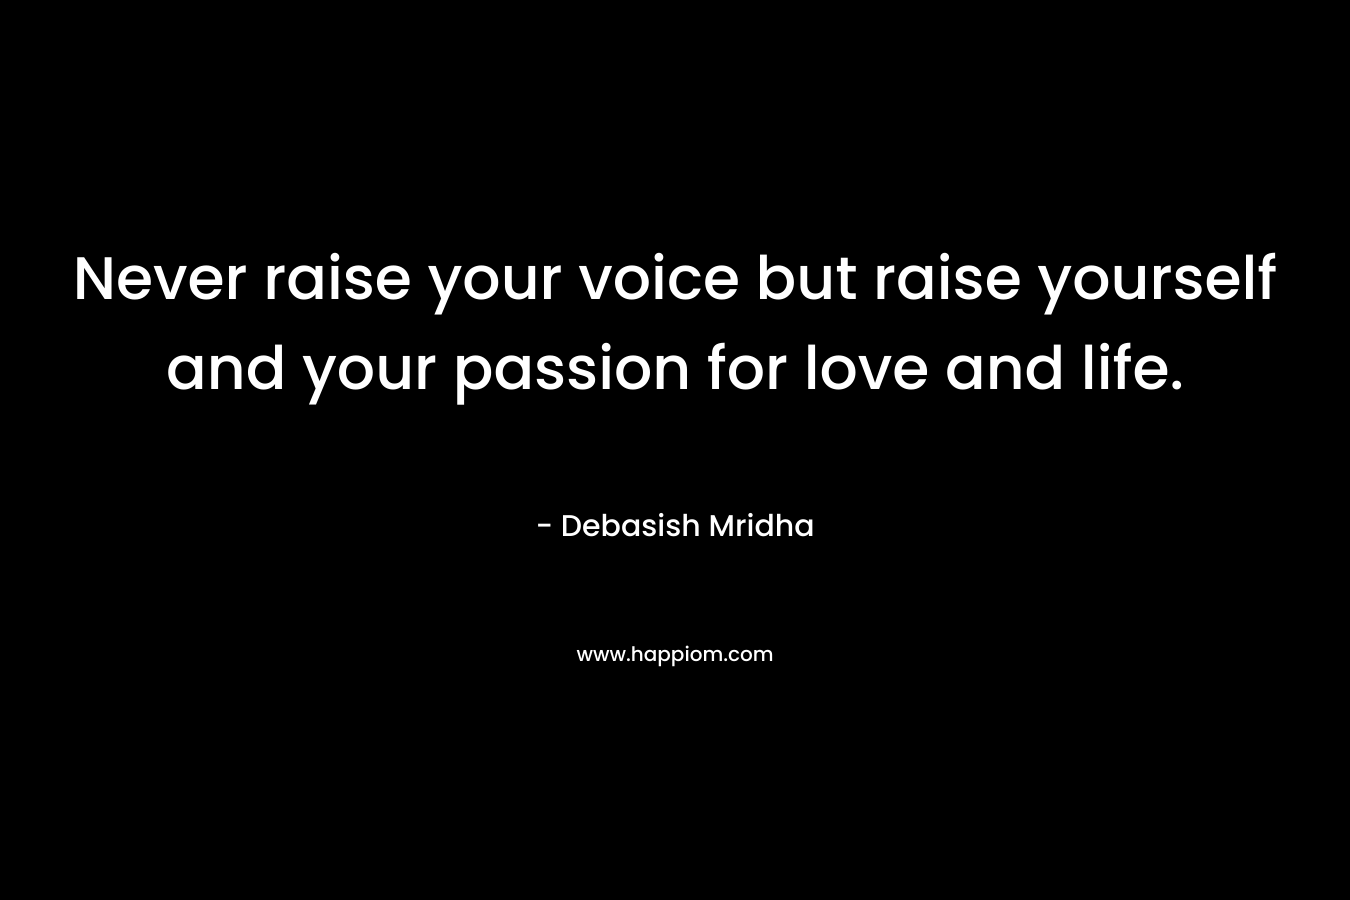 Never raise your voice but raise yourself and your passion for love and life.